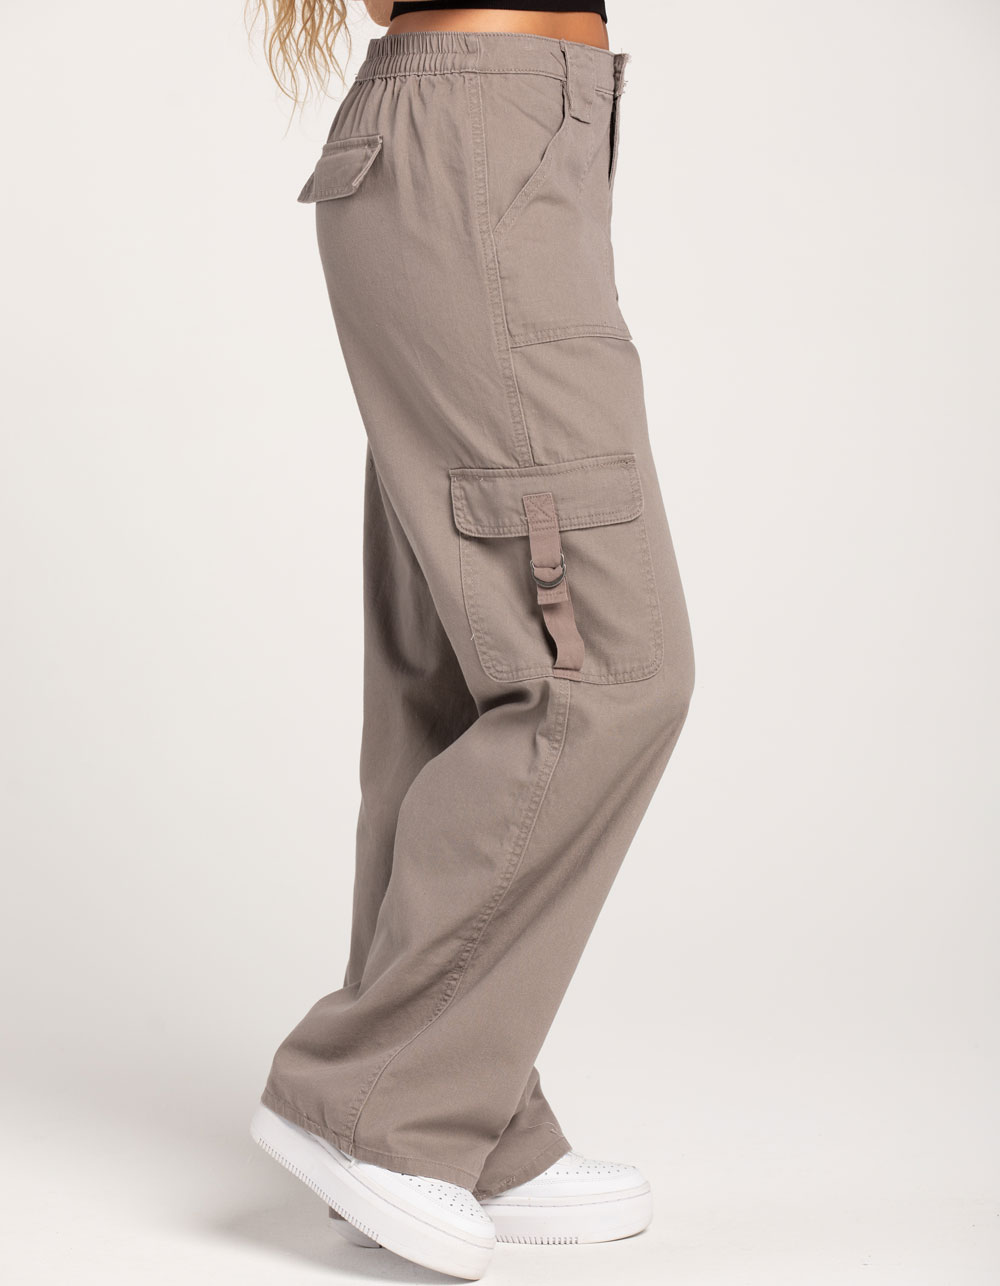 RSQ Womens Low Rise Cargo Pants - DK GREEN, Tillys